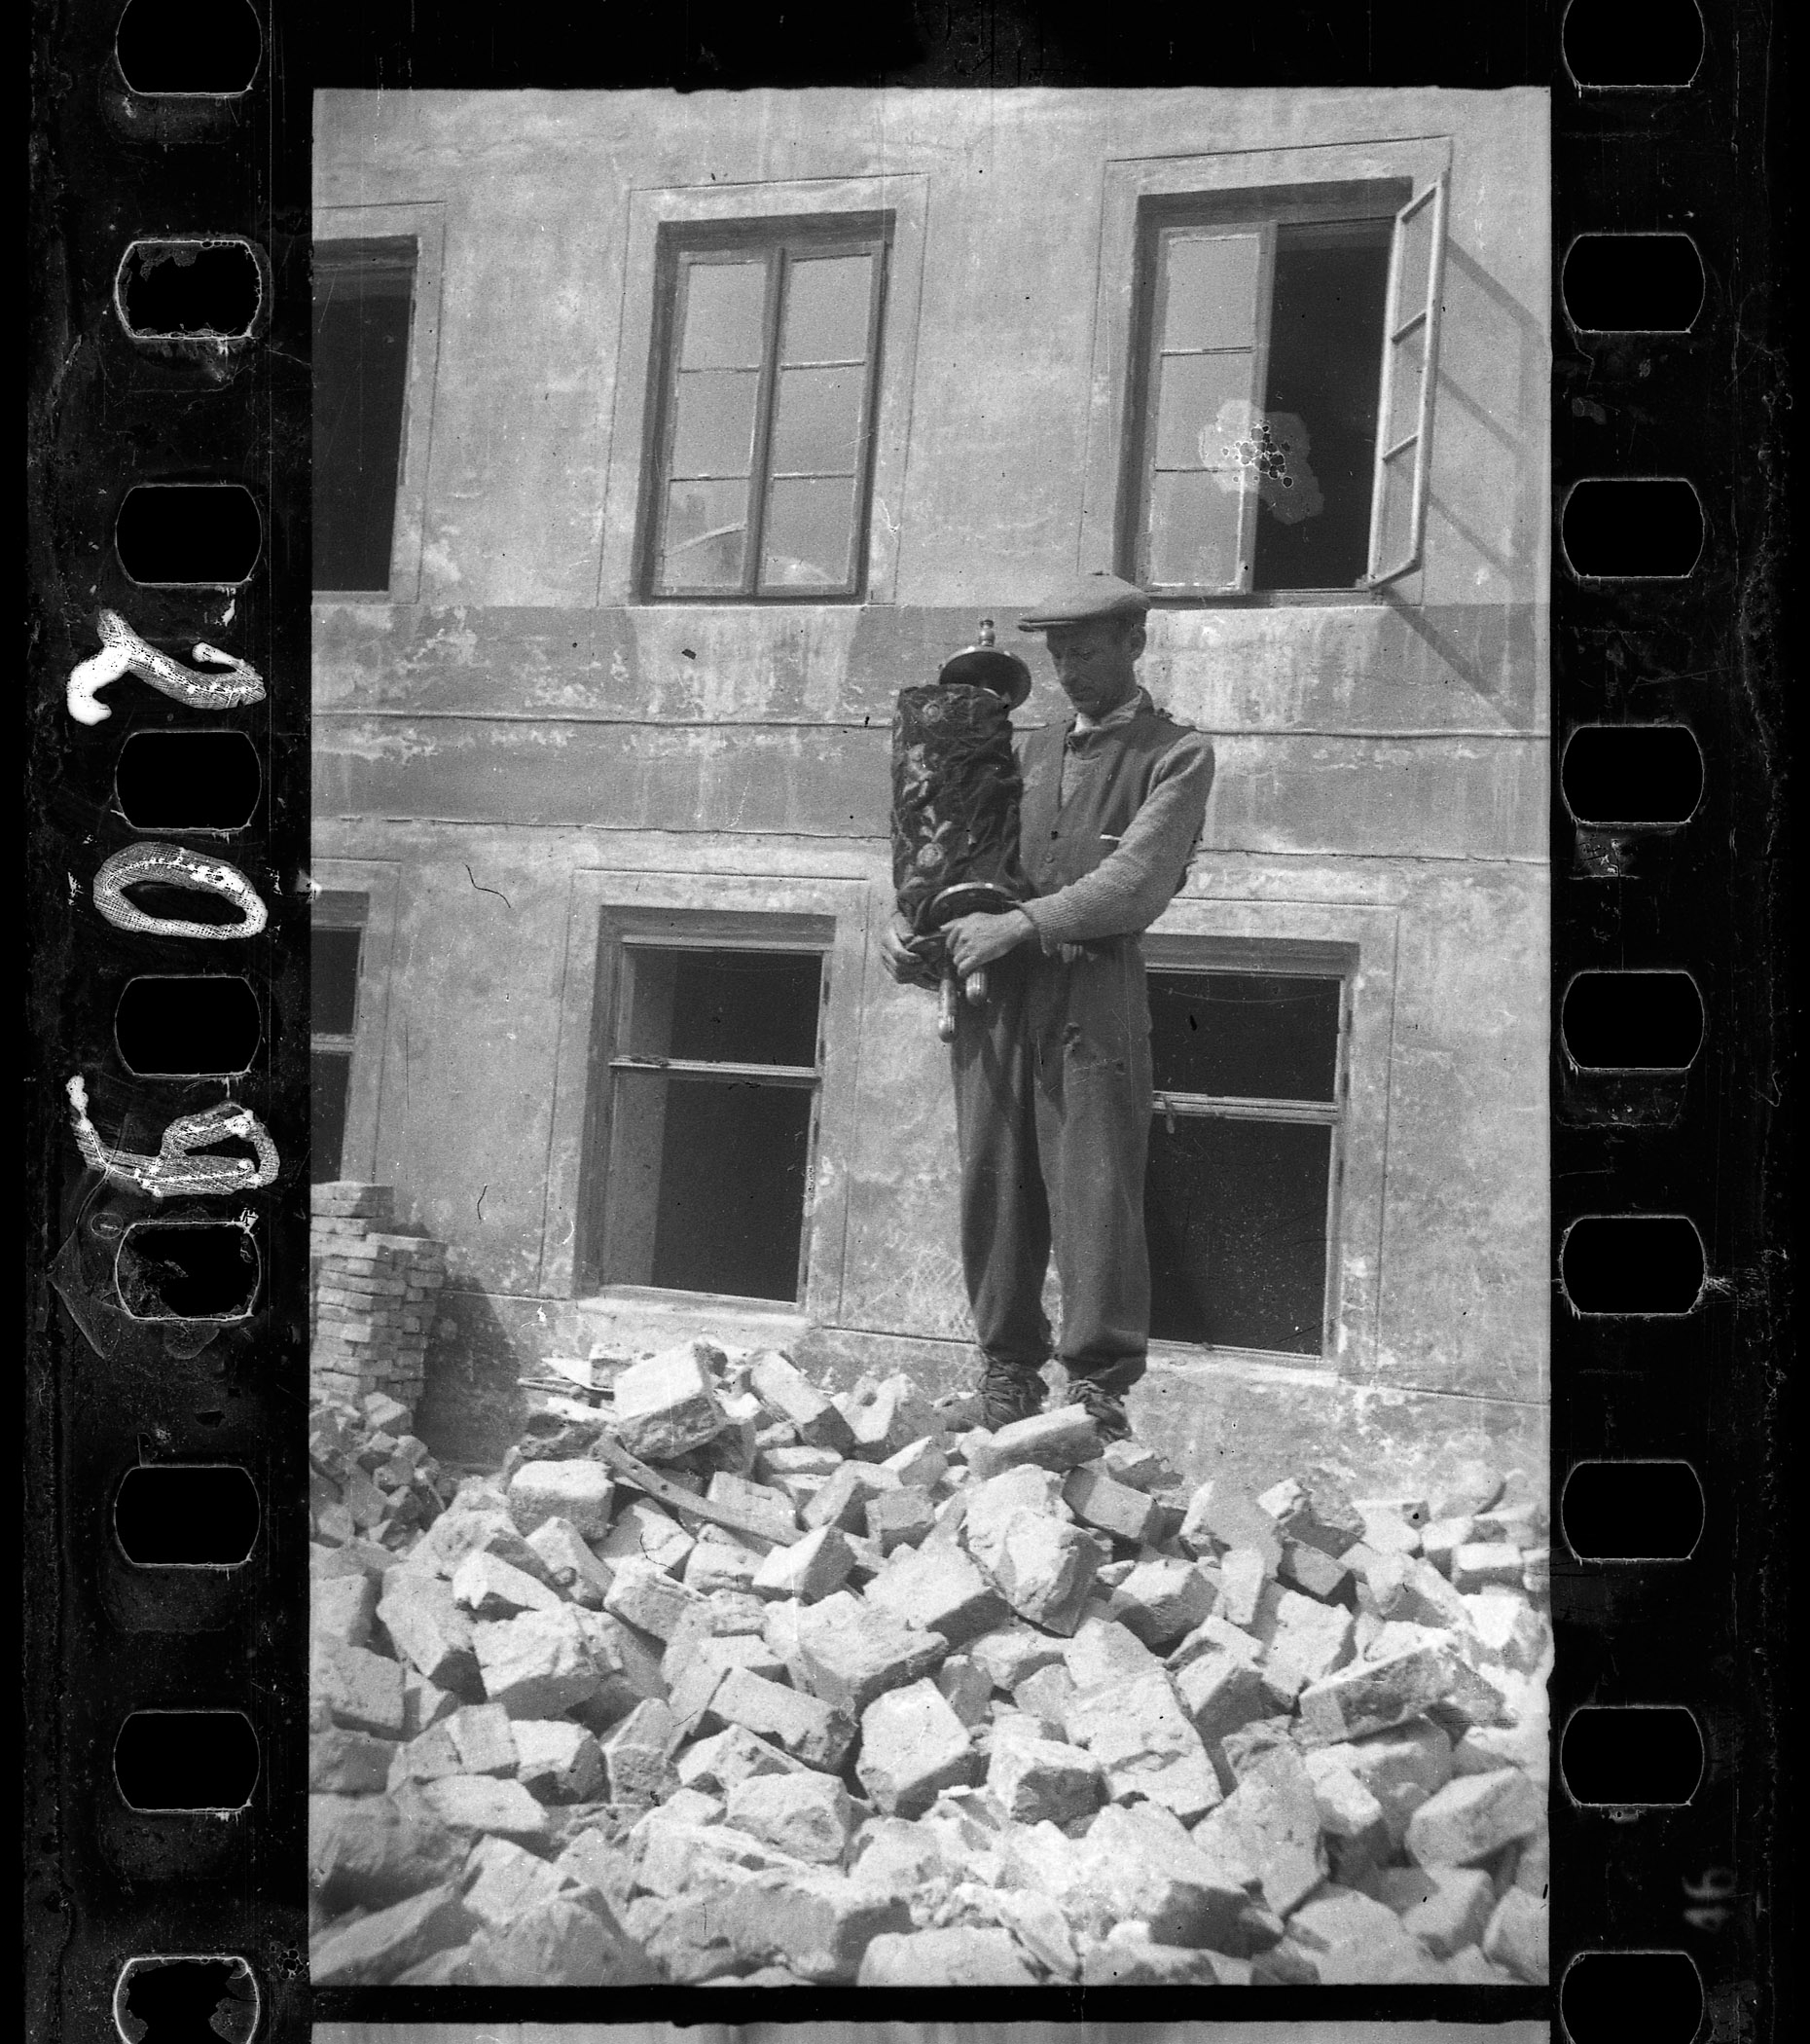     Henryk Ross, Lodz ghetto: Man who saved the Torah from the rubble of the synagogue on Wolborska street (destroyed by Germans 1939), 1940 Art Gallery of Ontario, Gift from Archive of Modern Conflict, 2007. Â© Art Gallery of Ontario

